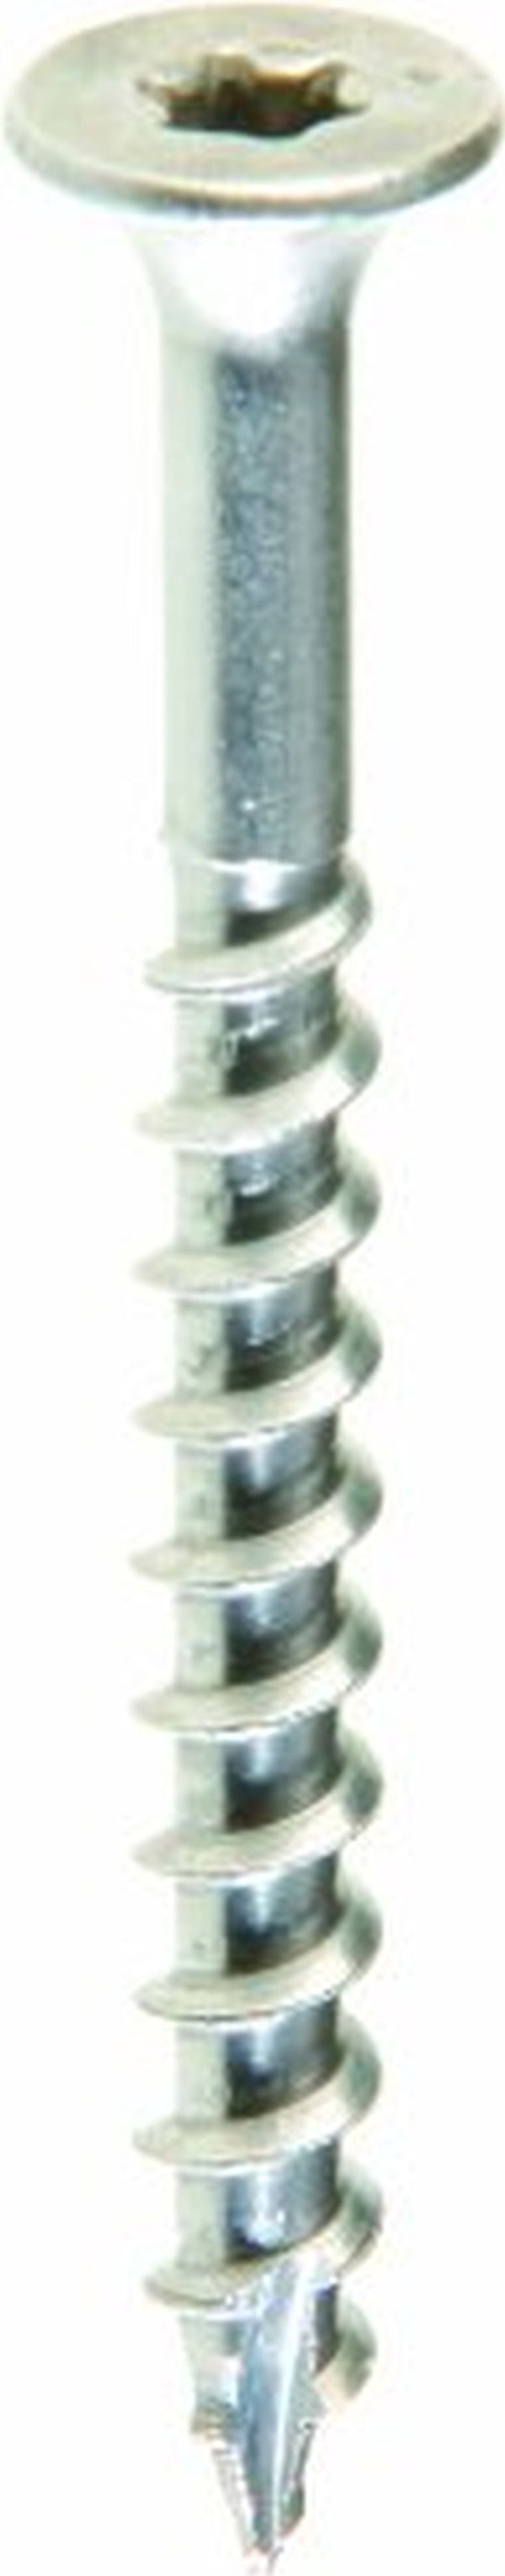 Grip Rite MAXS310DS305BK #10 x 3 in. 305 Stainless Steel Star Bugle Wood Deck Screw (1500-Pack)